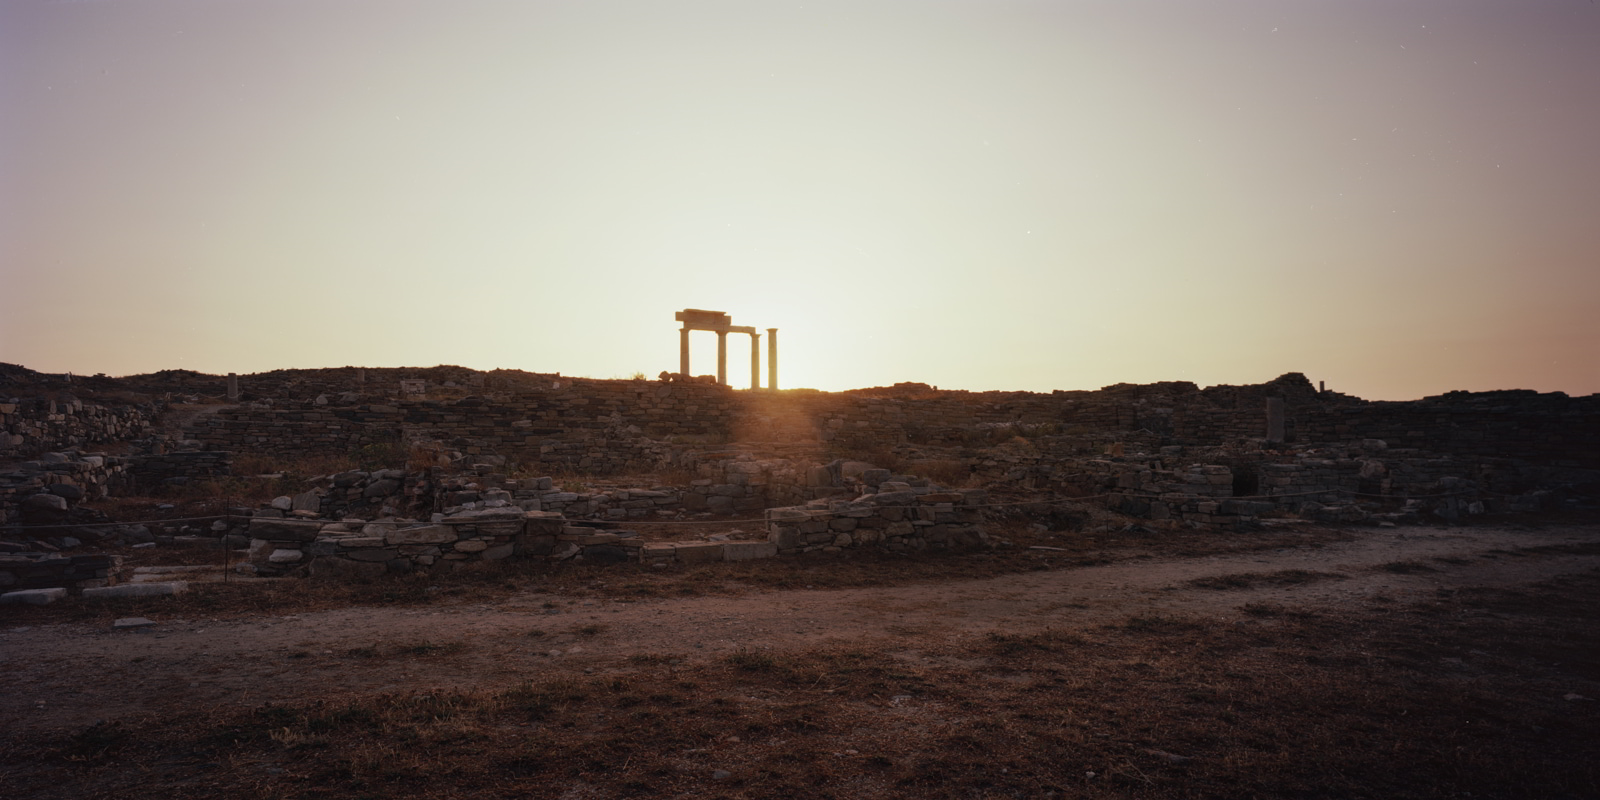 Archisearch AFLOAT | The Shifting Landscapes of Delos through the eyes of Erieta Attali